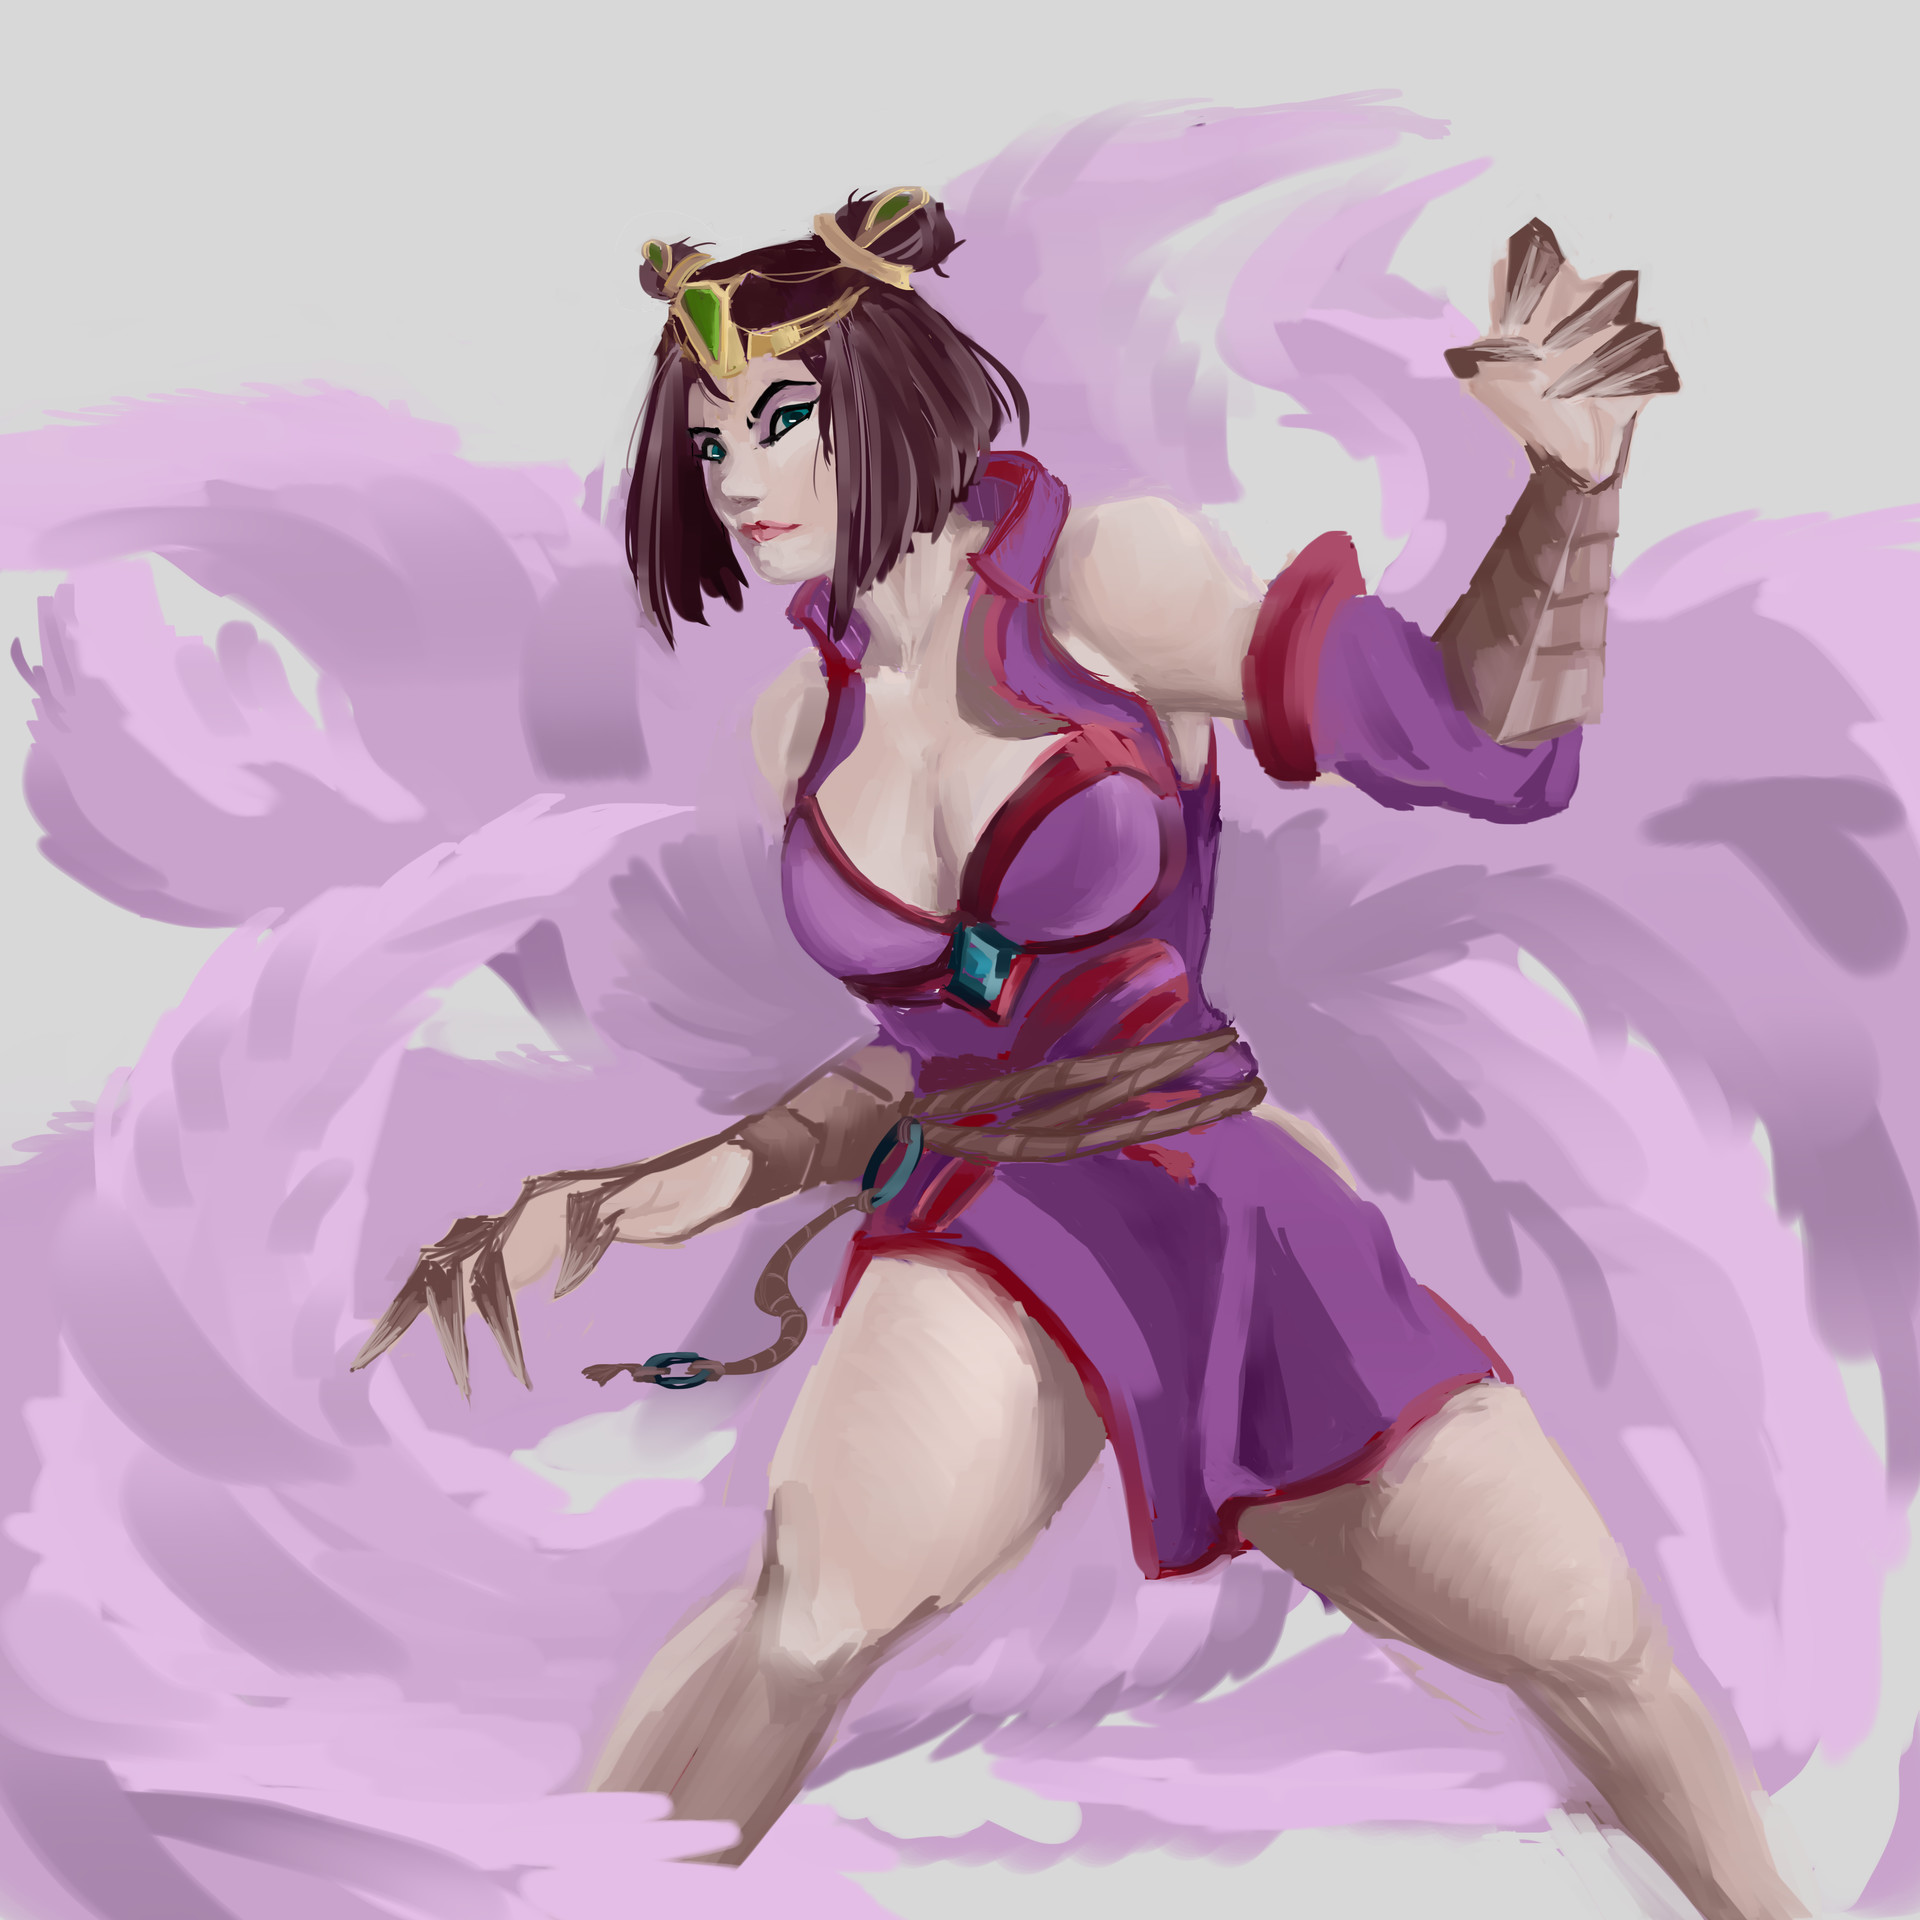 reference of the pose was from Smite goddes Da Ji, the Nine-tailed fox